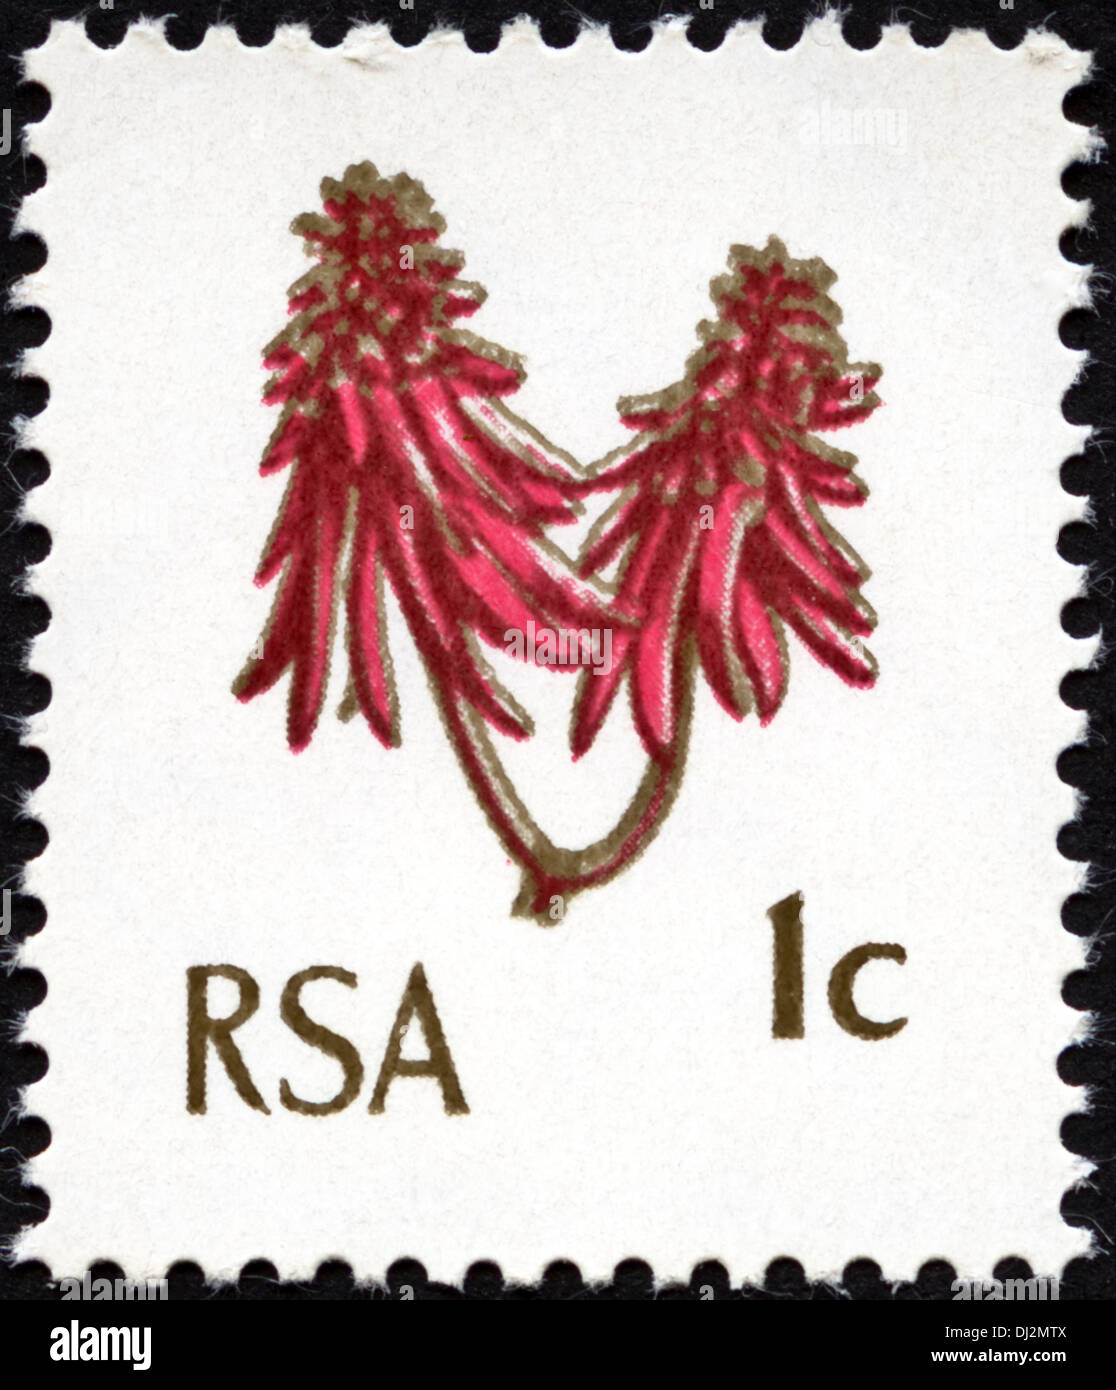 postage stamp Republic of South Africa RSA 1c featuring Coral Tree Flower dated 1969 Stock Photo